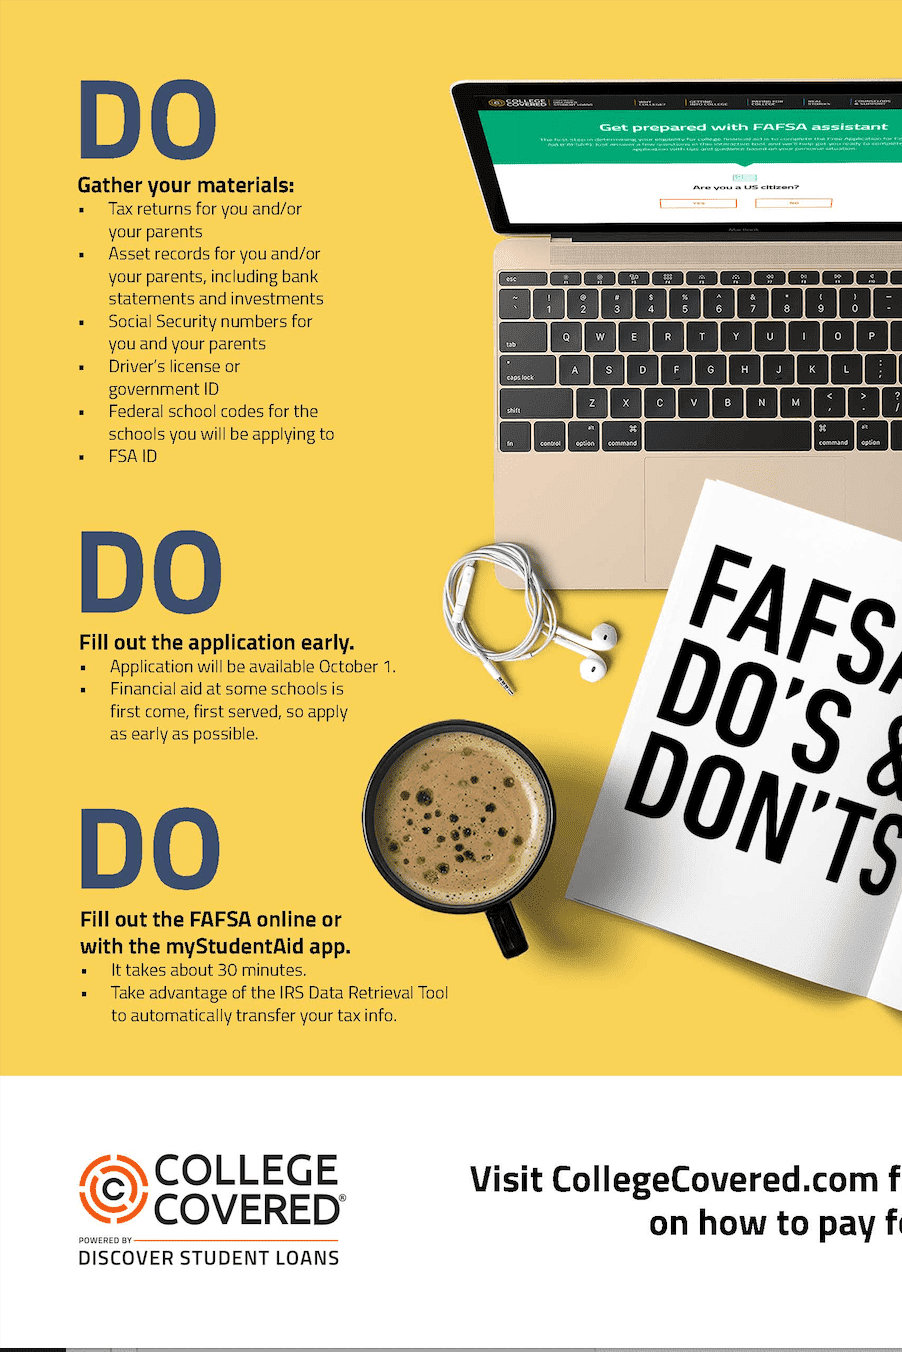 FAFSA® Do’s and Don’ts